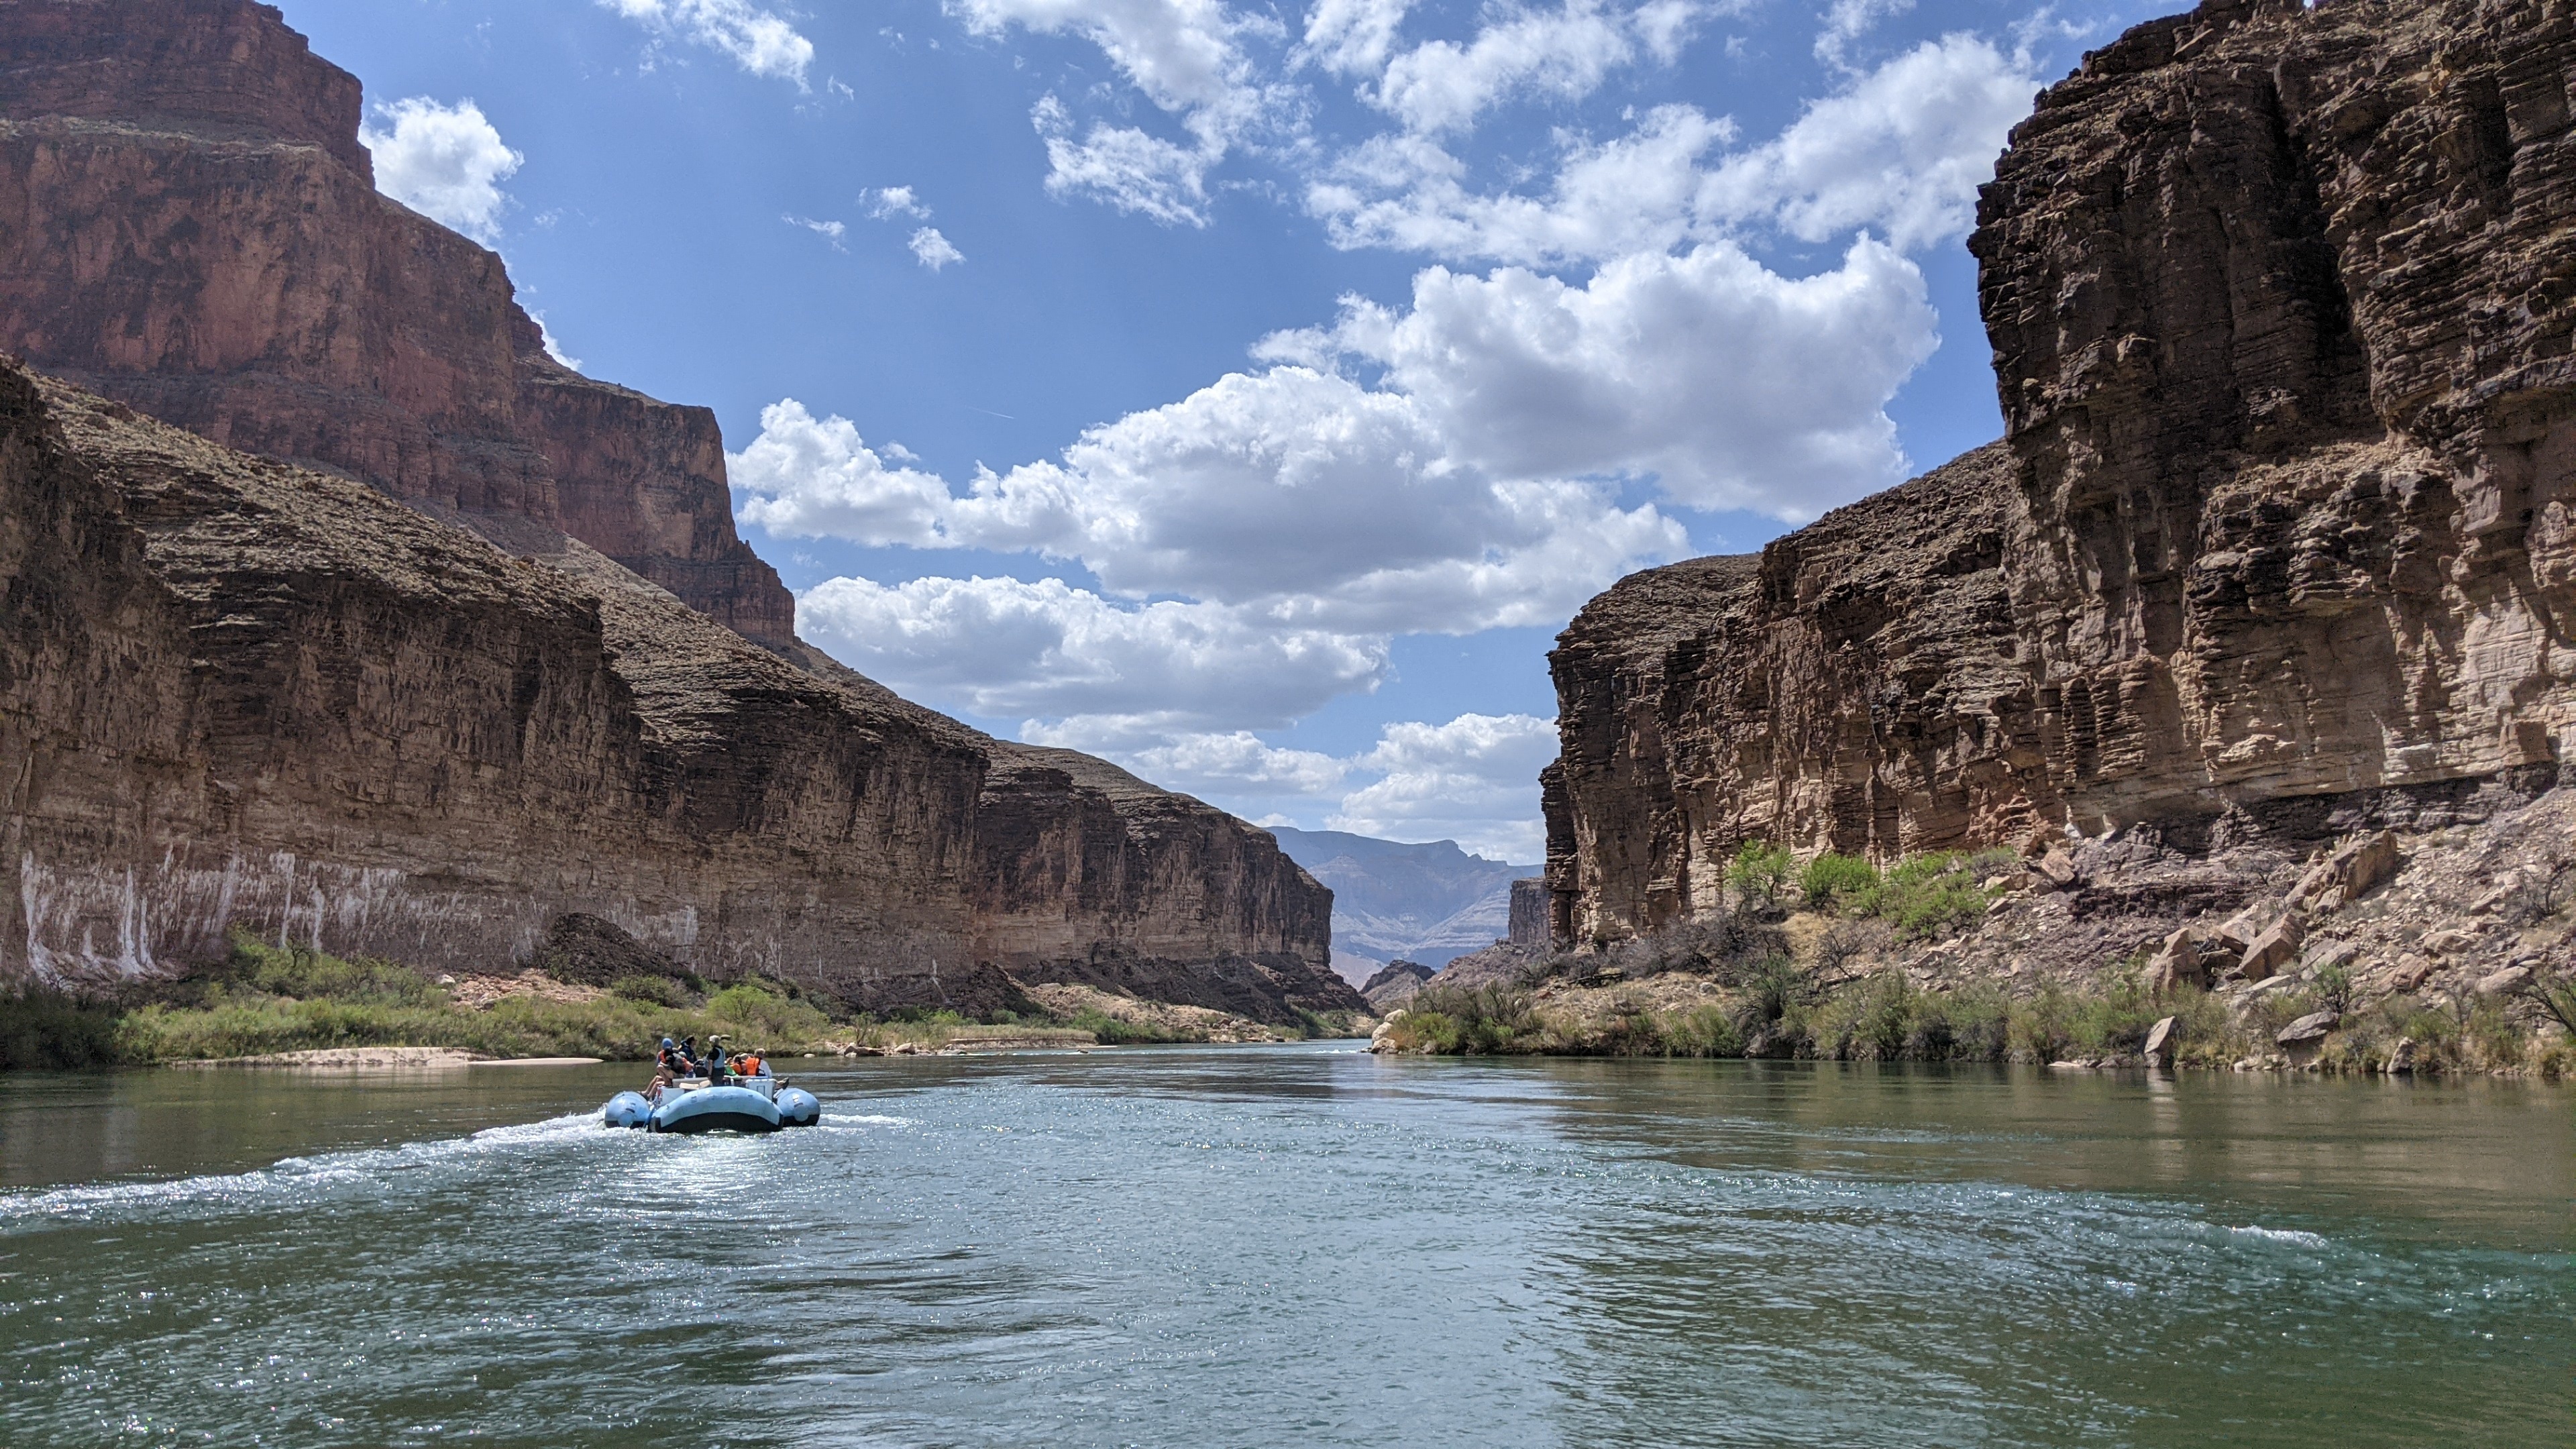 The Colorado River, Geological mysteries, Ancient history, Grand Canyon's enigma, 3840x2160 4K Desktop